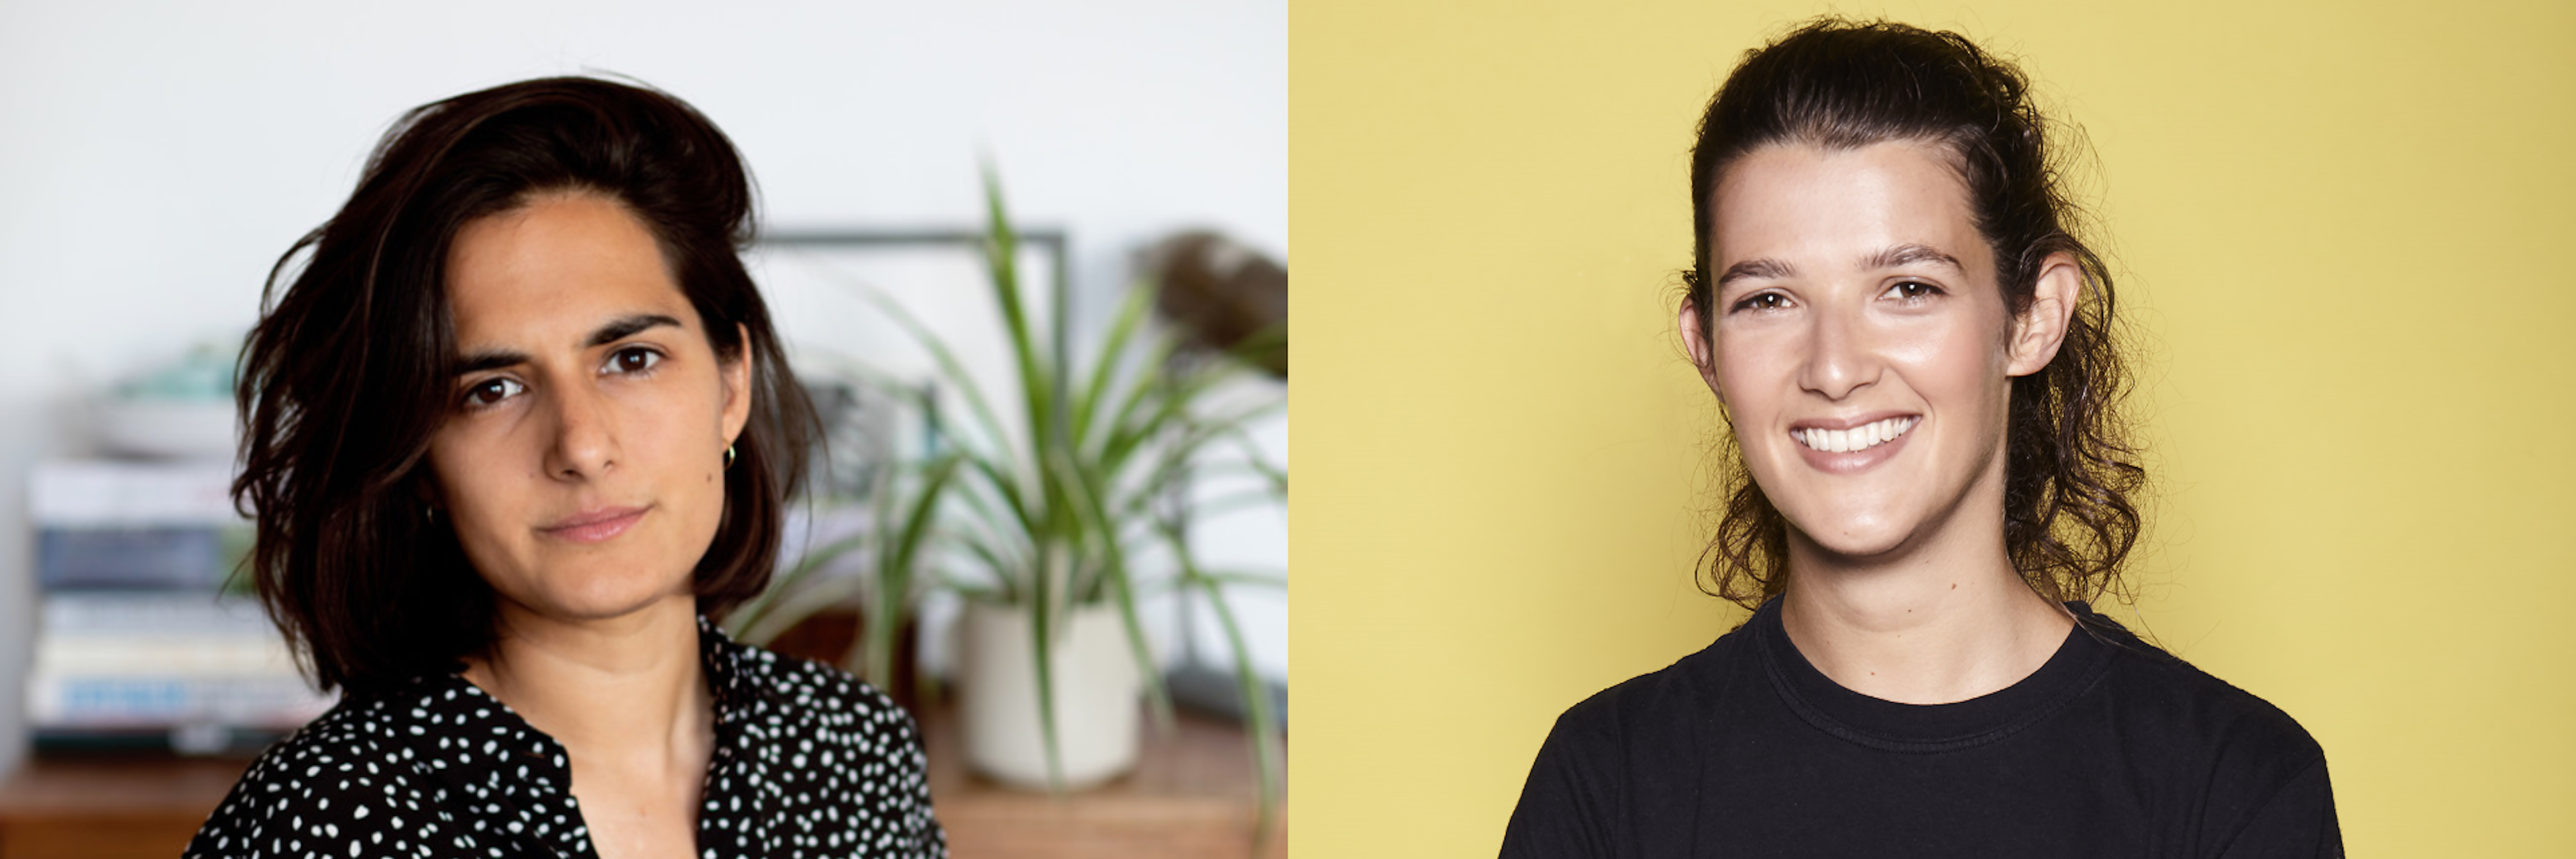 Hannah Leach and Ginny Watsham, partners at Houghton Street Ventures and GMG Ventures, respectively